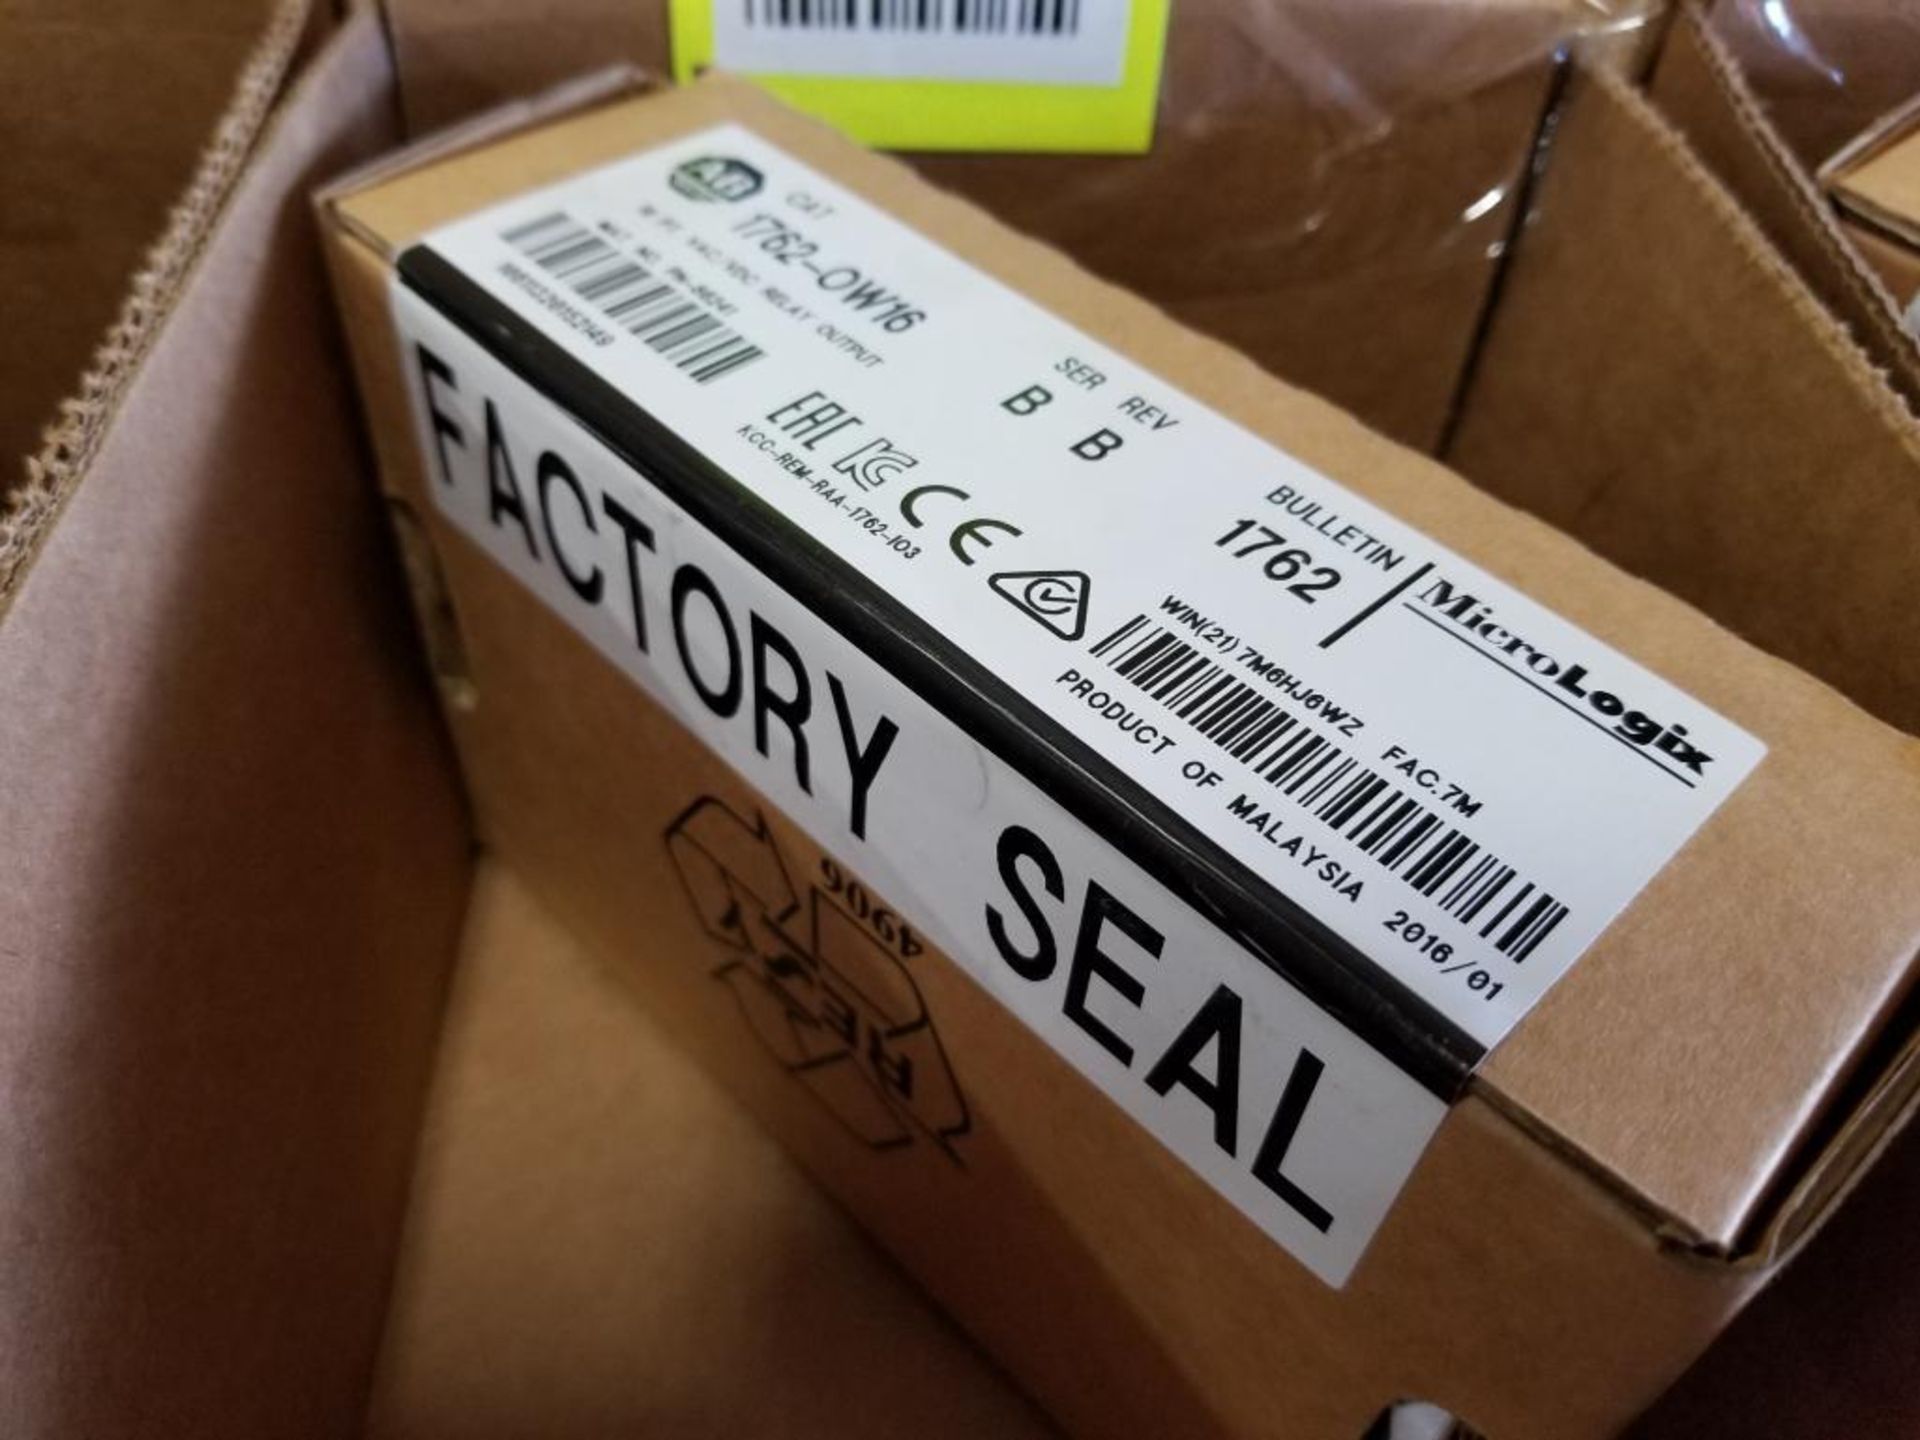 Allen Bradley 1762-OW16 16-pt VAC/VDC relay output module. New in sealed box. - Image 2 of 3